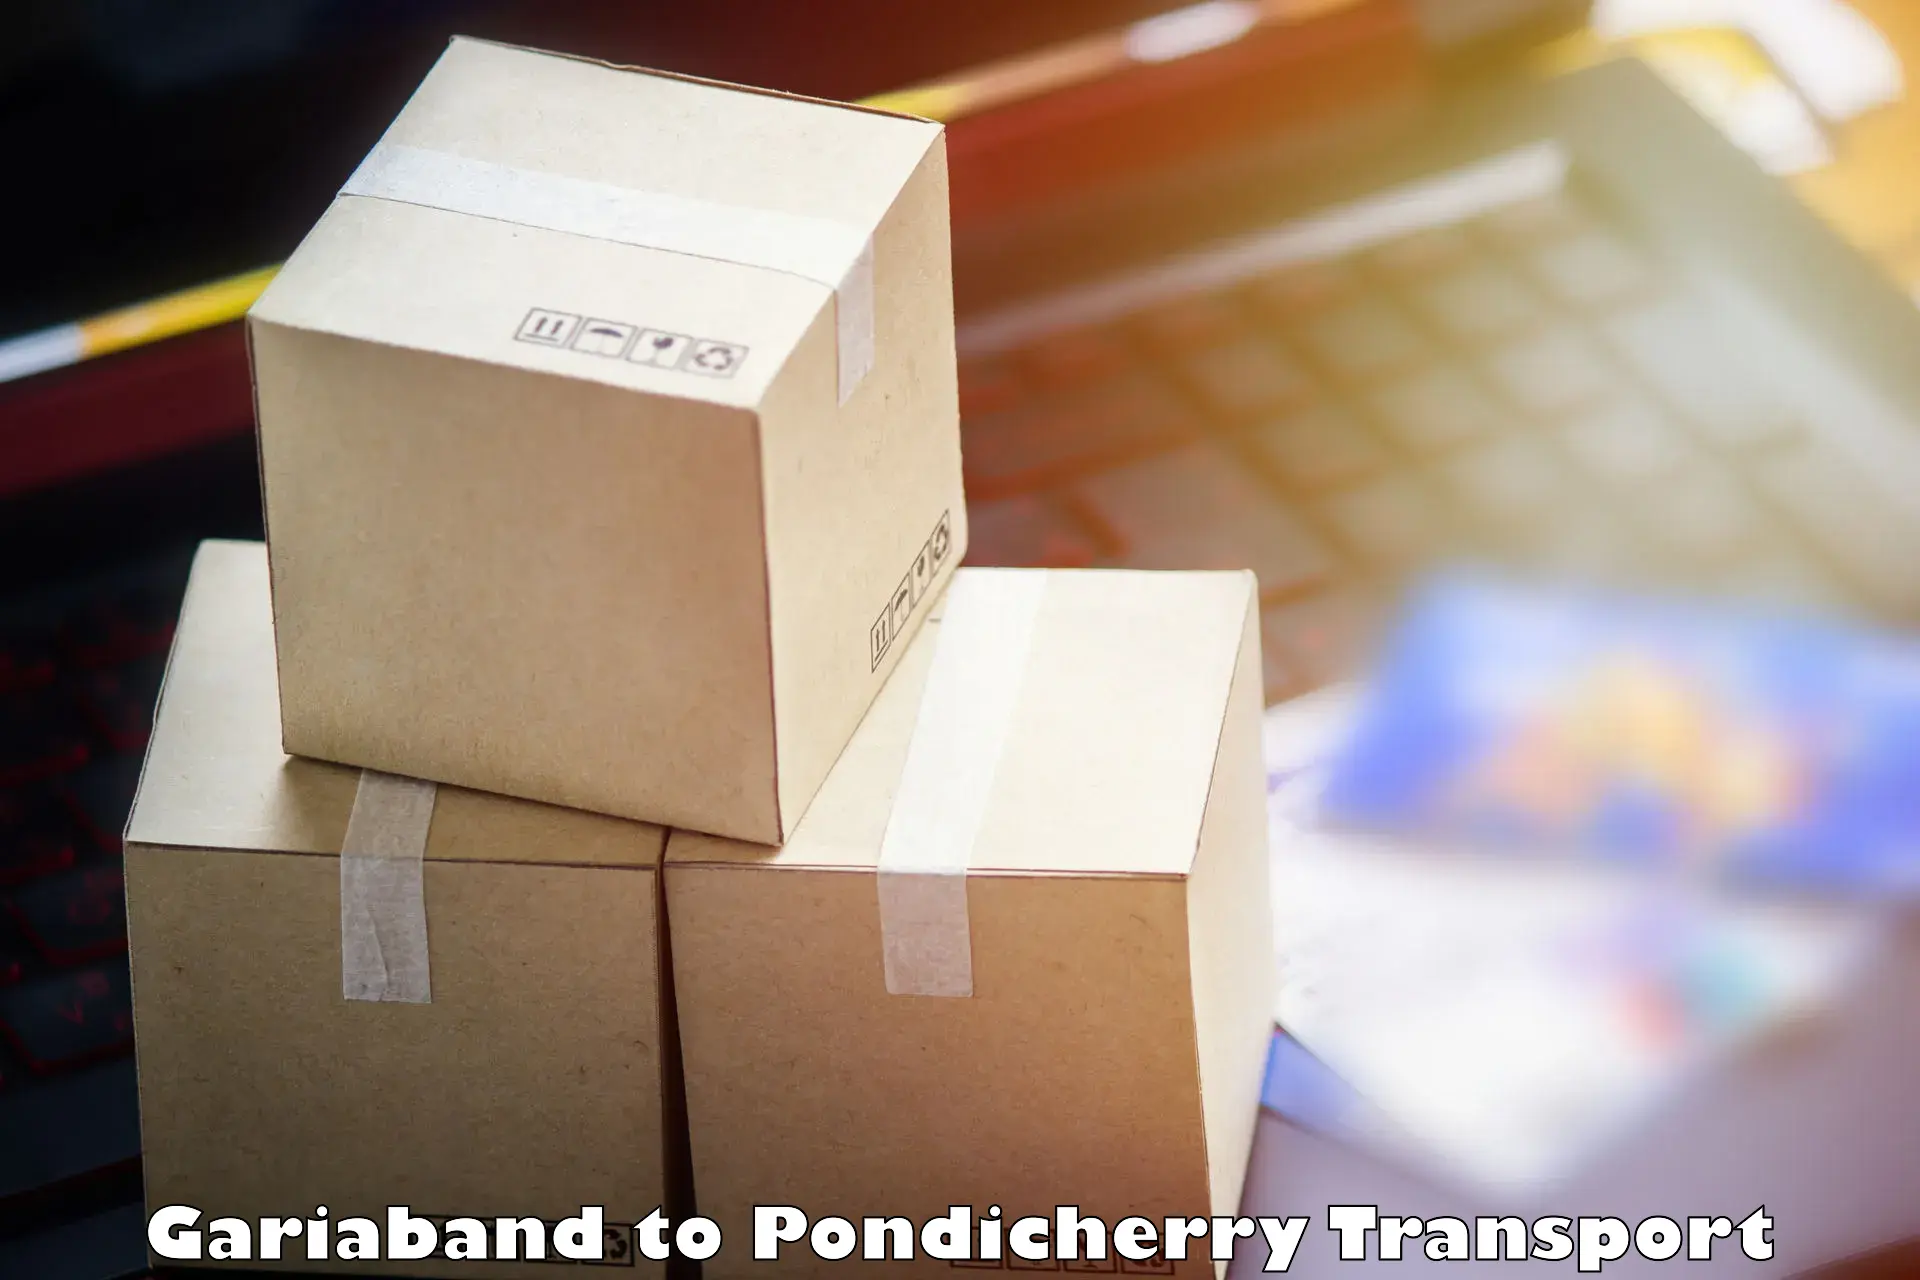 Air freight transport services Gariaband to Pondicherry University